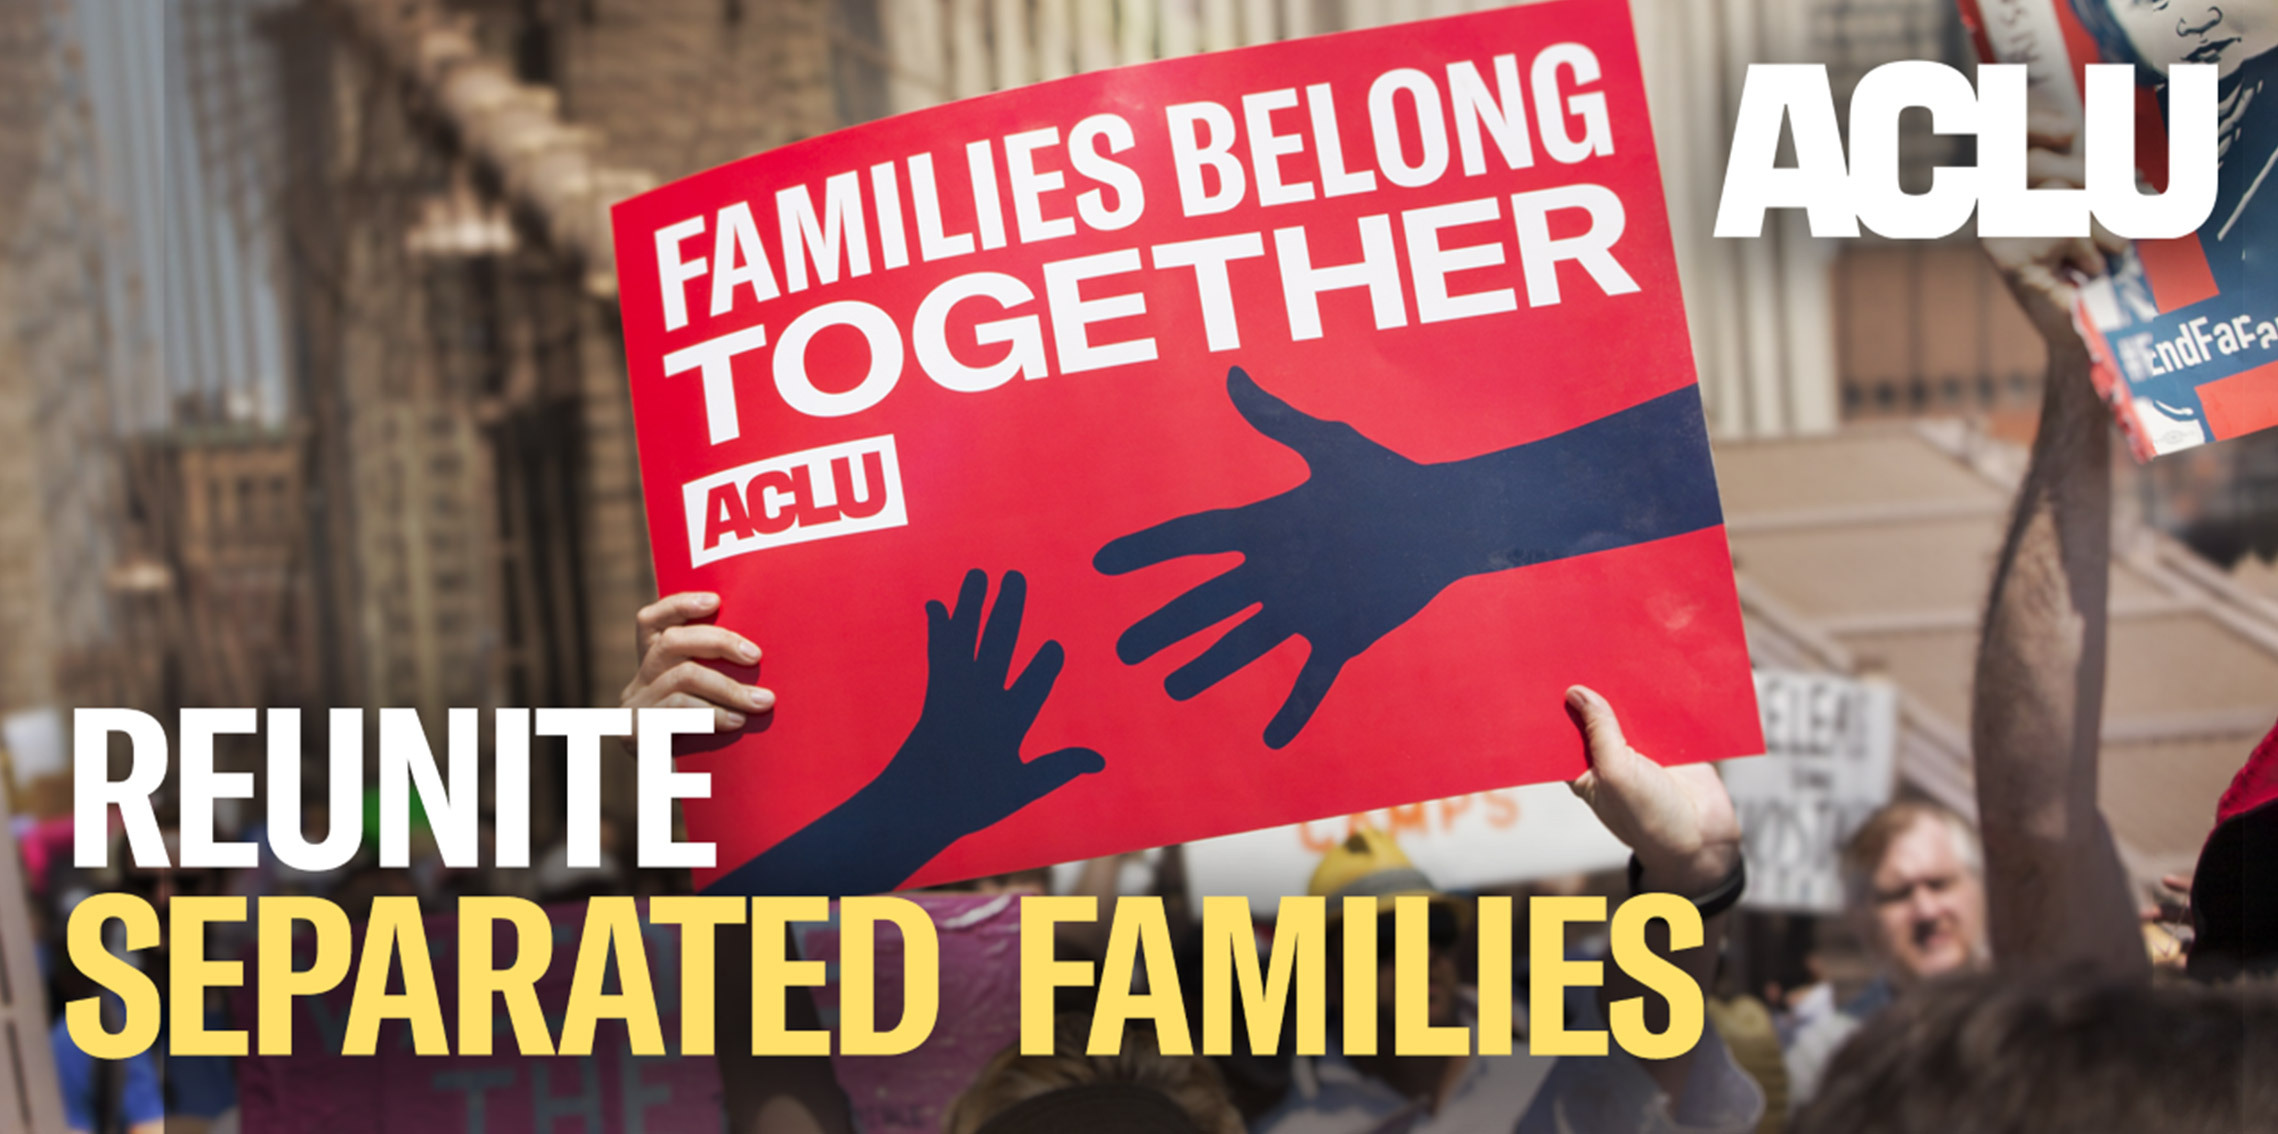 Someone holds an ACLU sign that reads "Families Belong Together"